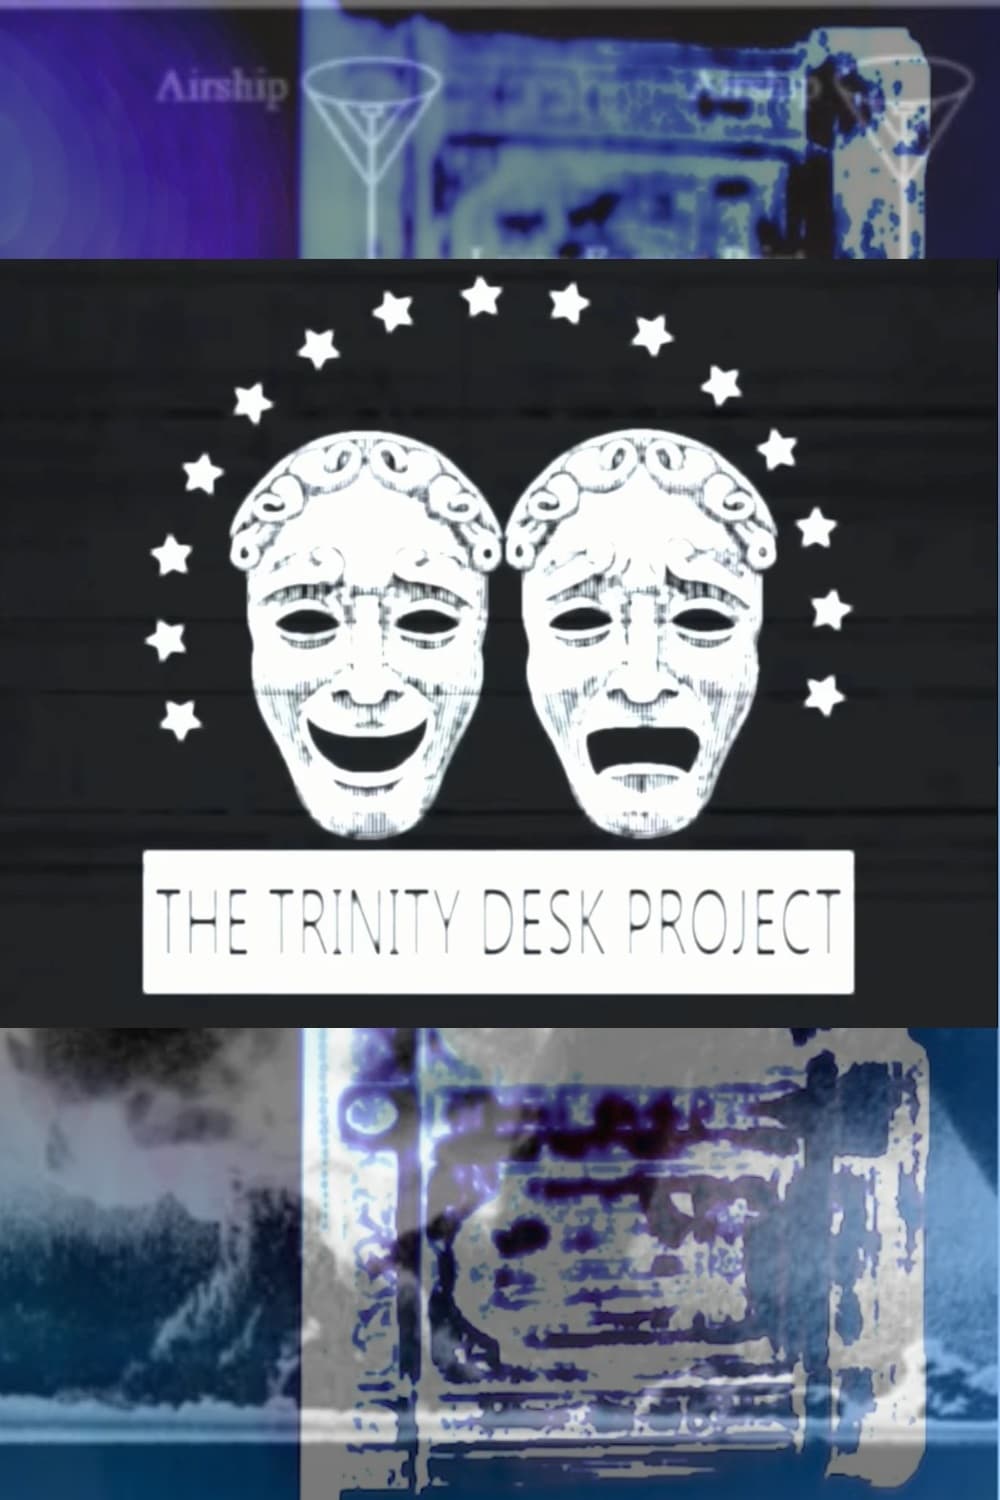 The Trinity Desk Project